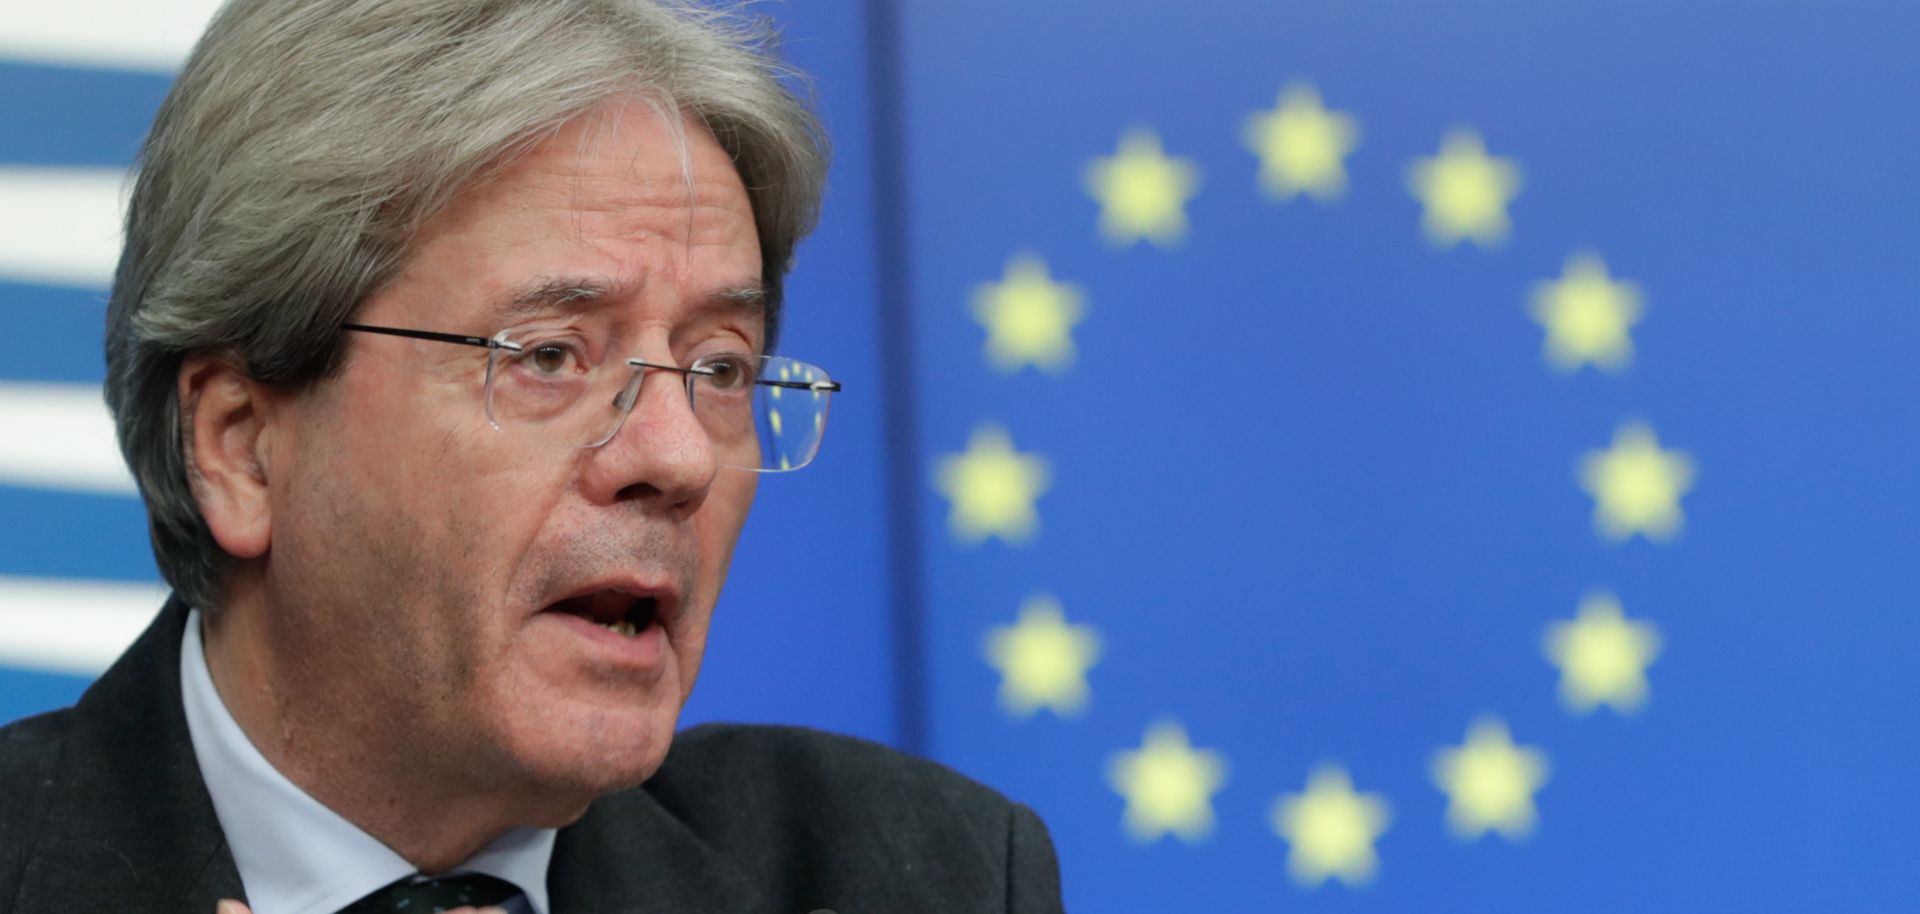 EU Economy Commissioner Paolo Gentiloni speaks during a press conference after a virtual meeting at the European Council in Brussels, Belgium, on Feb. 15, 2021. 